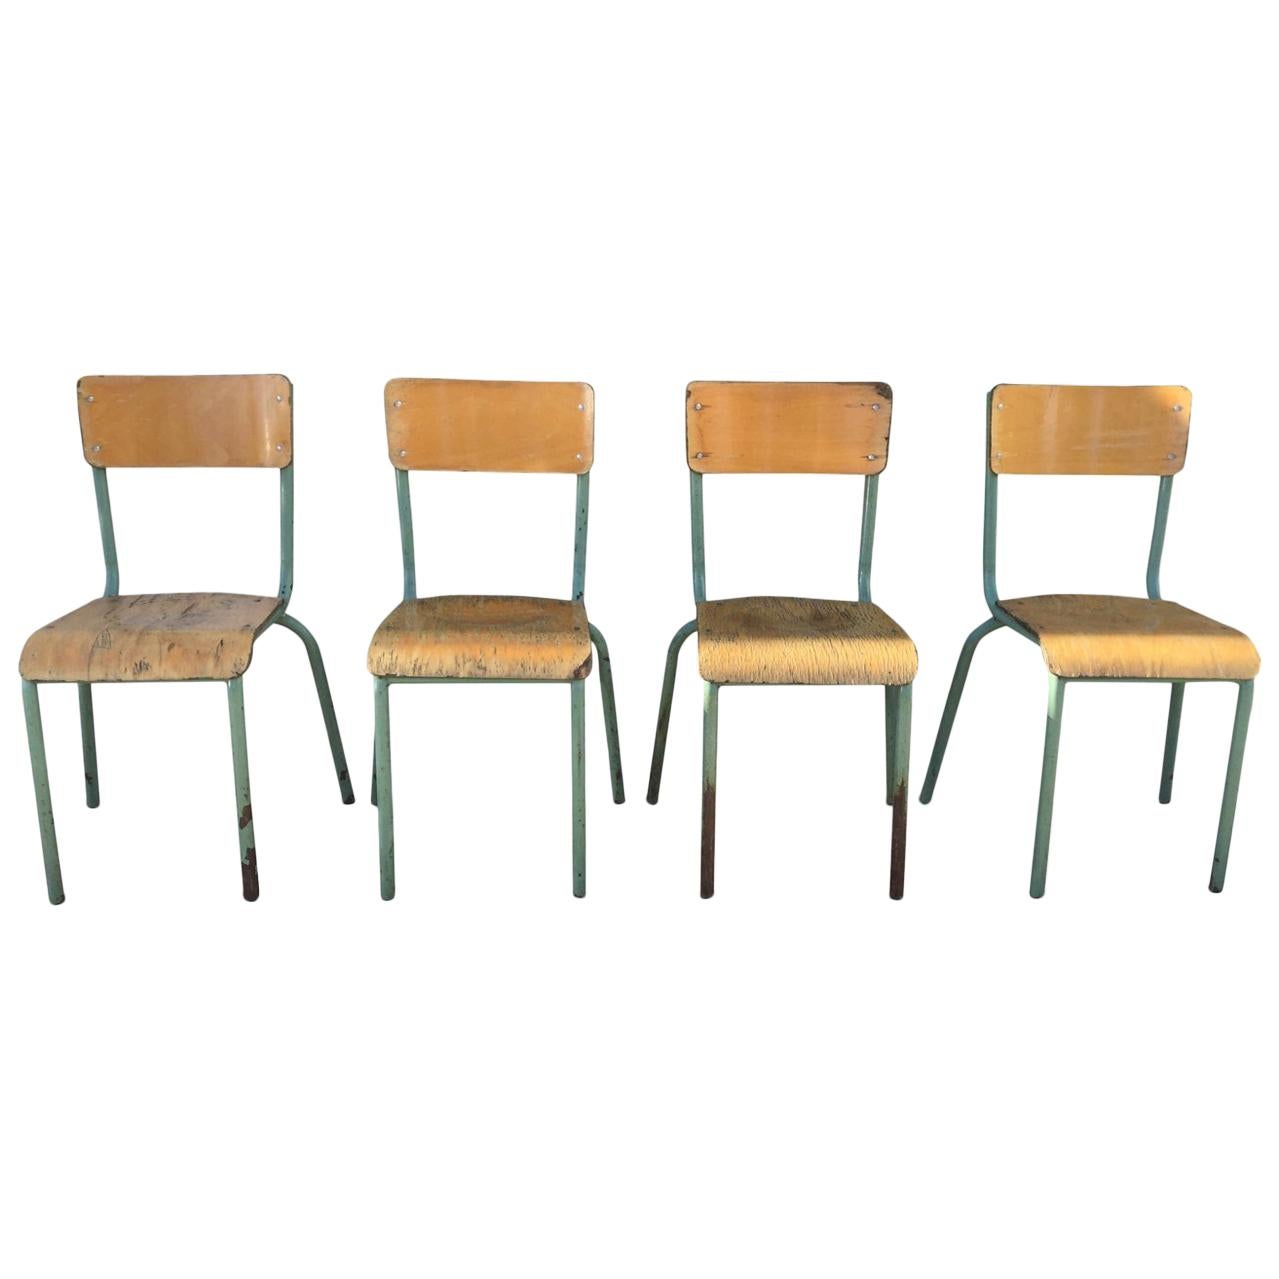 1930s French Jean Prouvé Style School Chairs